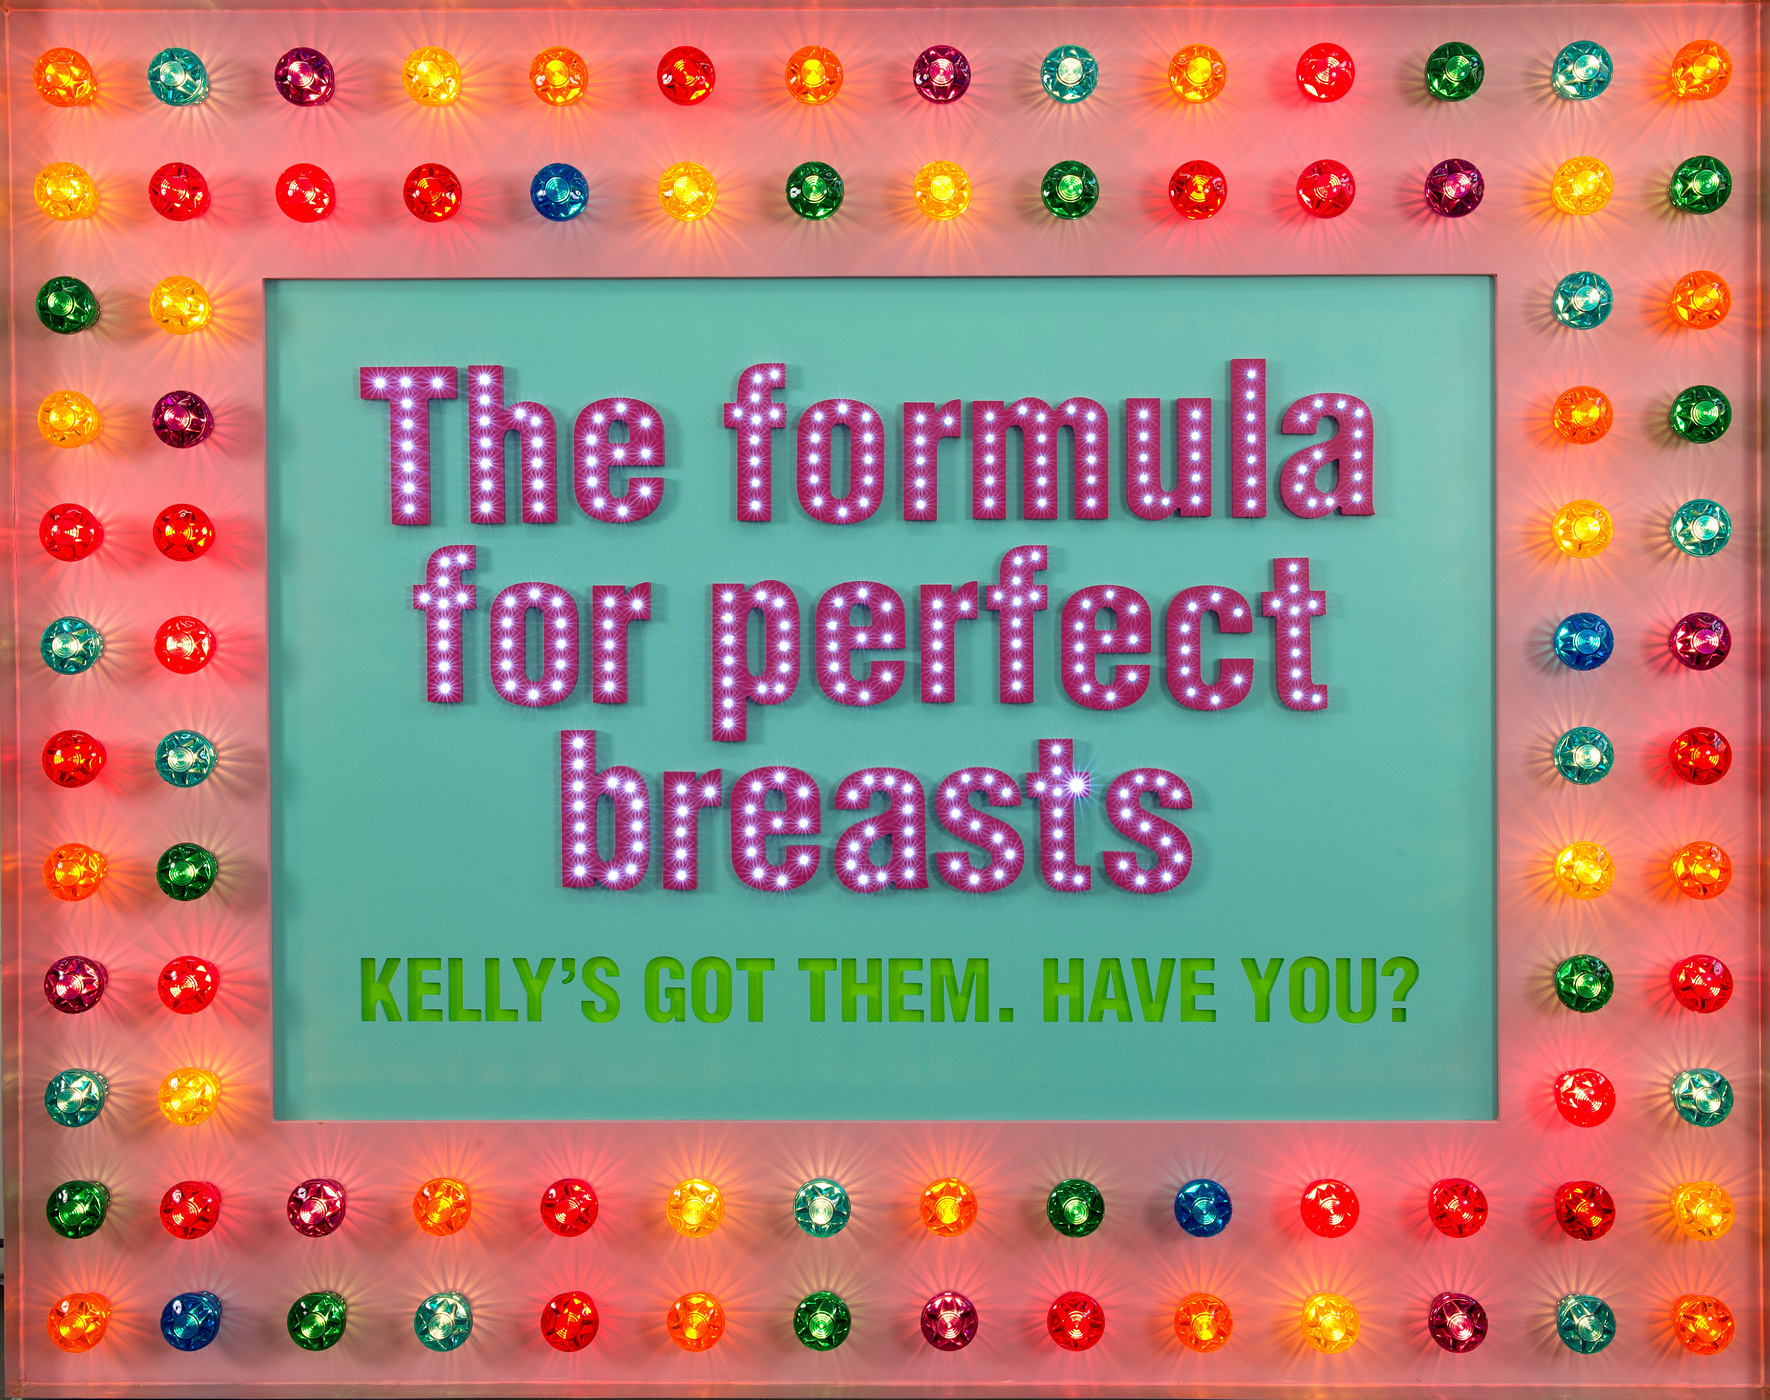 The formula for perfect breasts